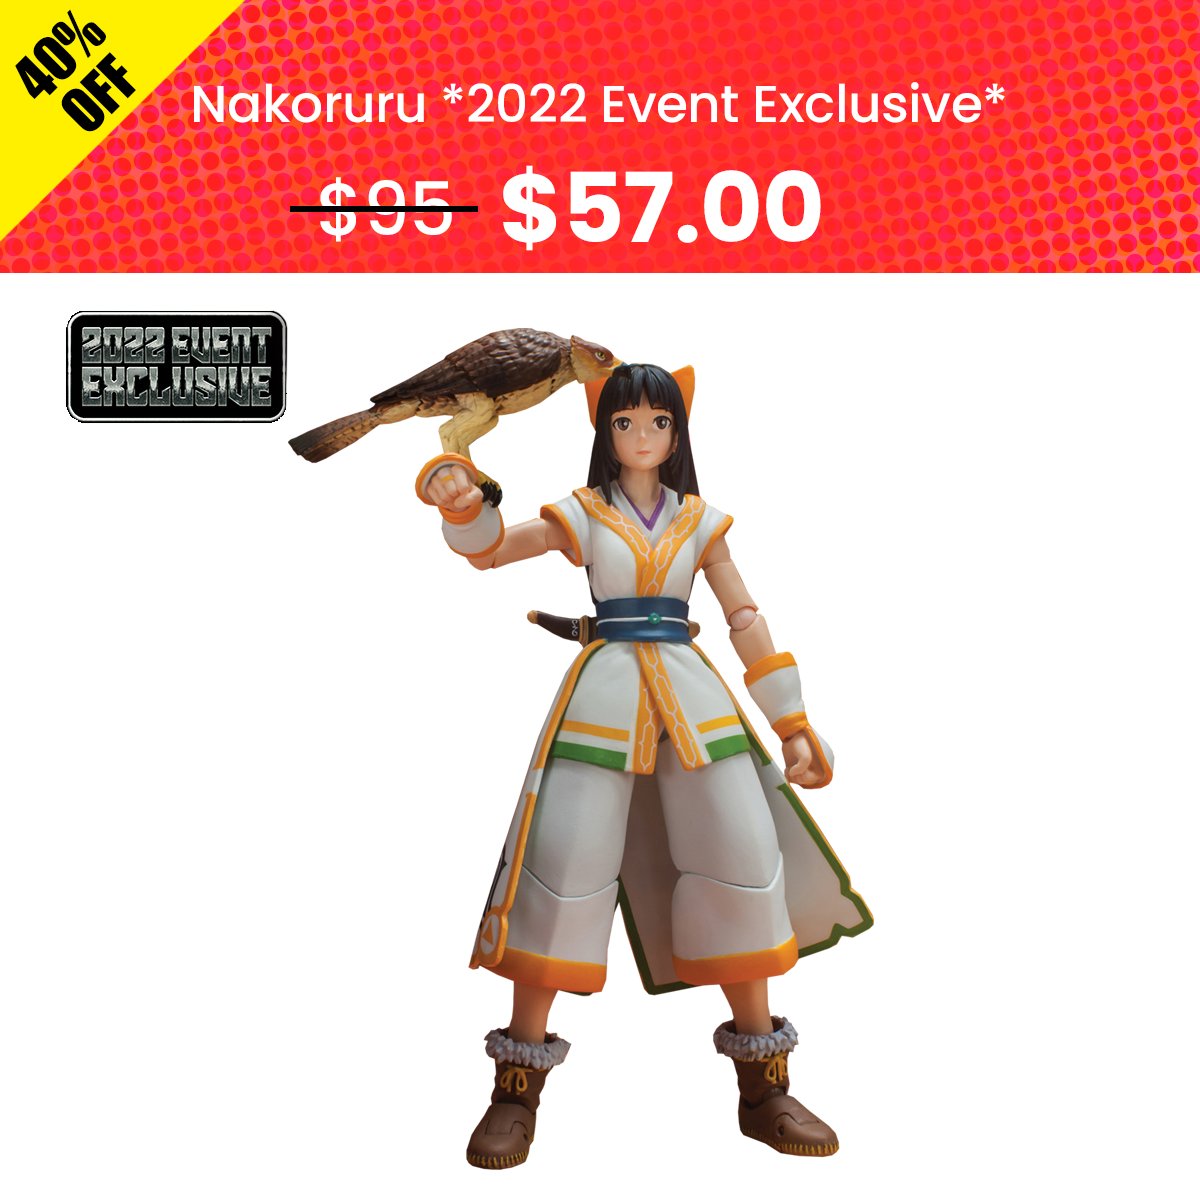 Nakoruru *2022 Event Exclusive* is available on shop.bandai.com during our #CyberWeek Sale. Don't miss this chance to pick up this exclusive 40% OFF! #SamuraiShodown #ActionFigure